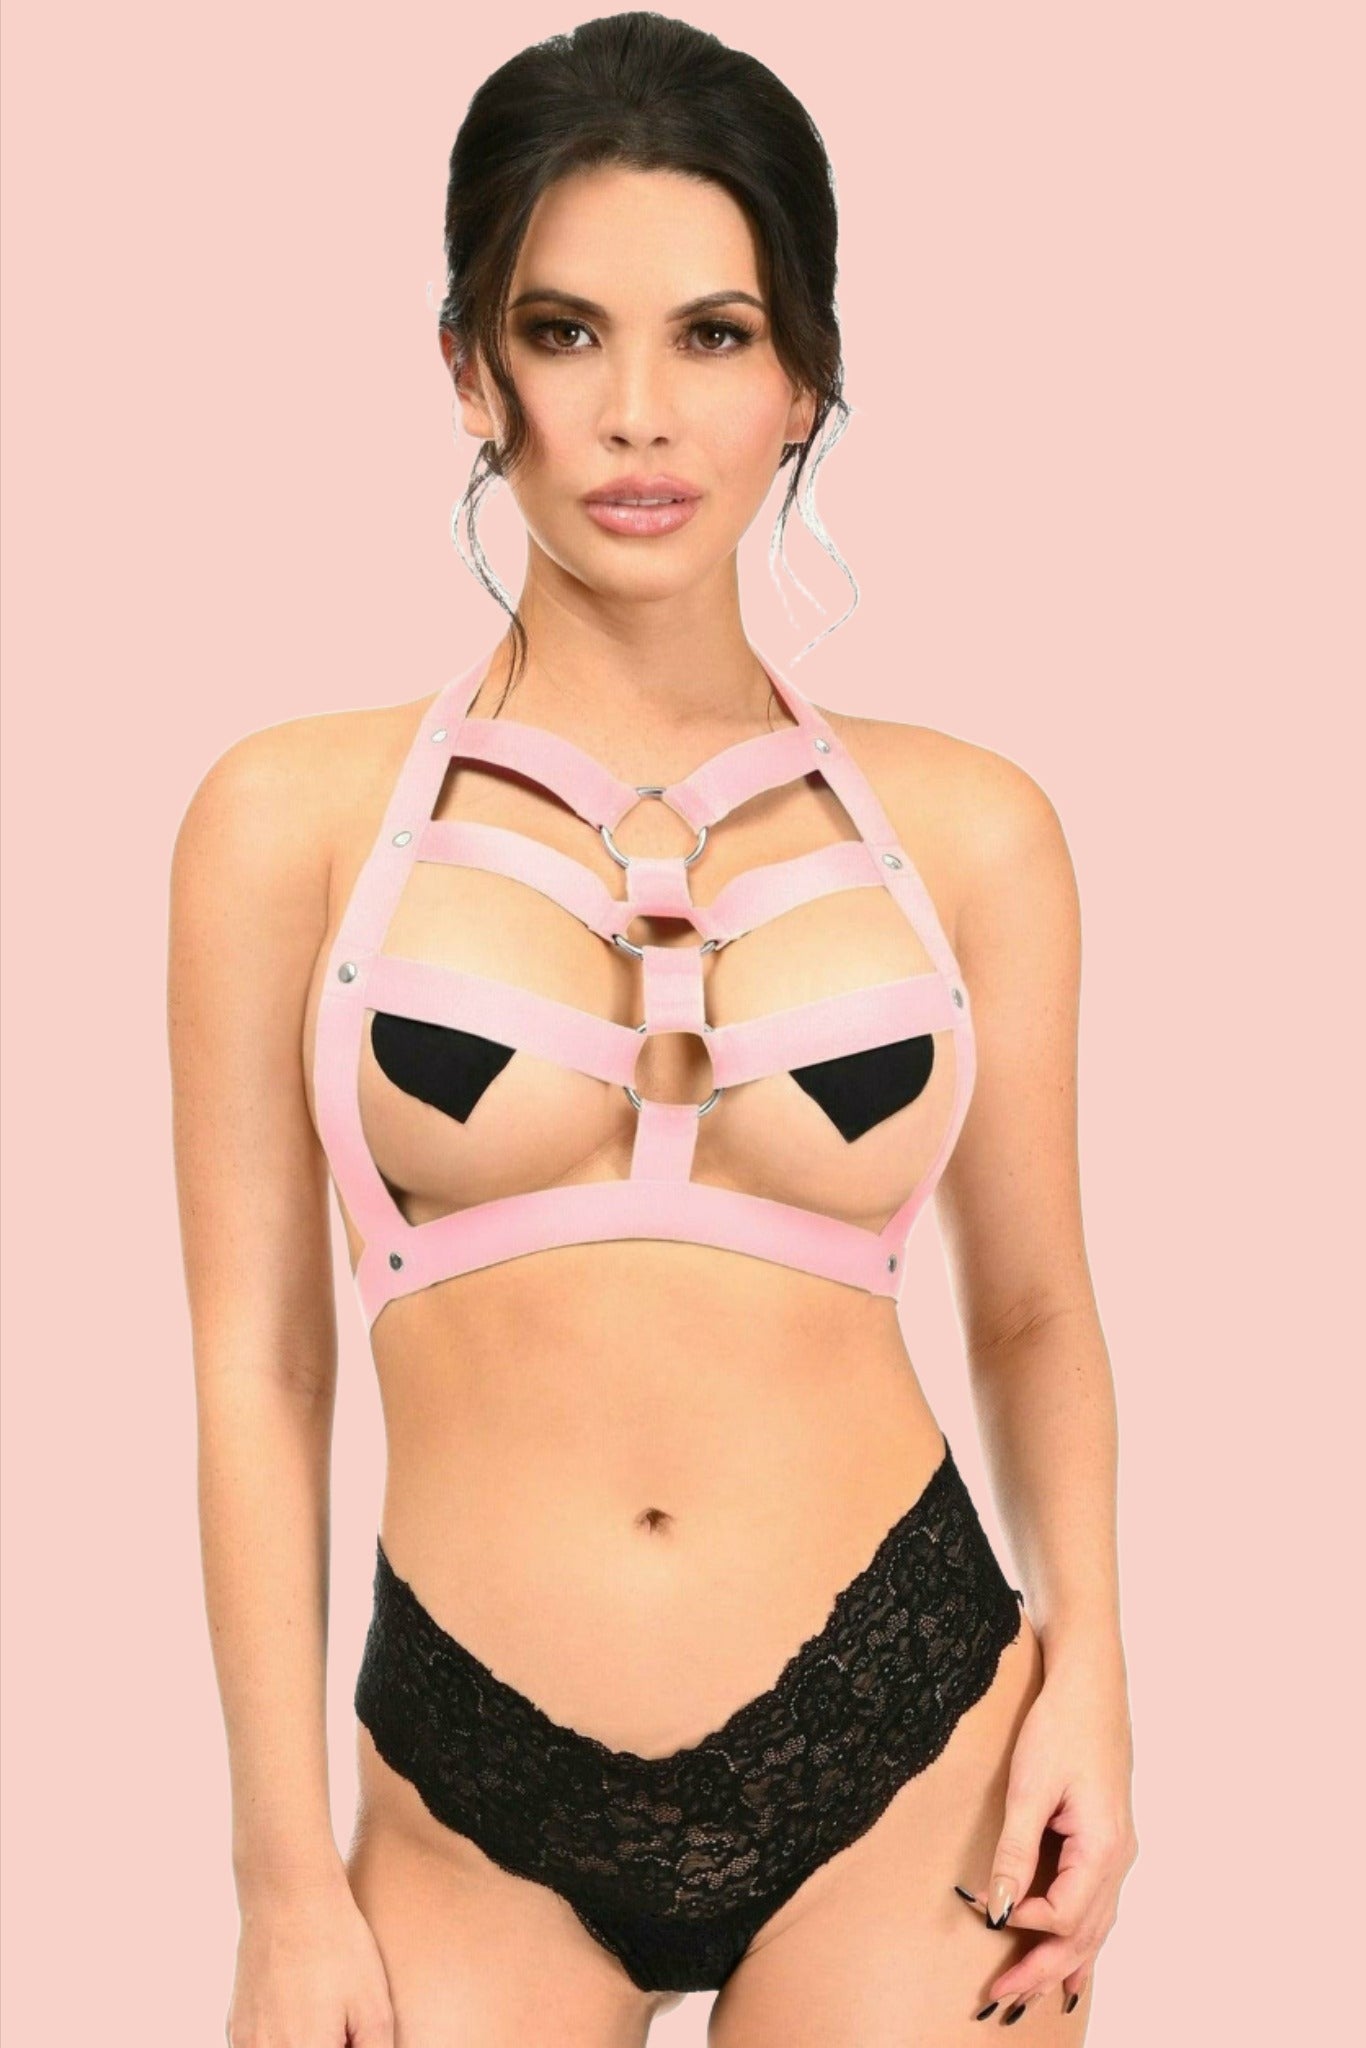 Stretchy Body Harness with Silver Hardware in Black or Light Pink in Size Regular or Queen